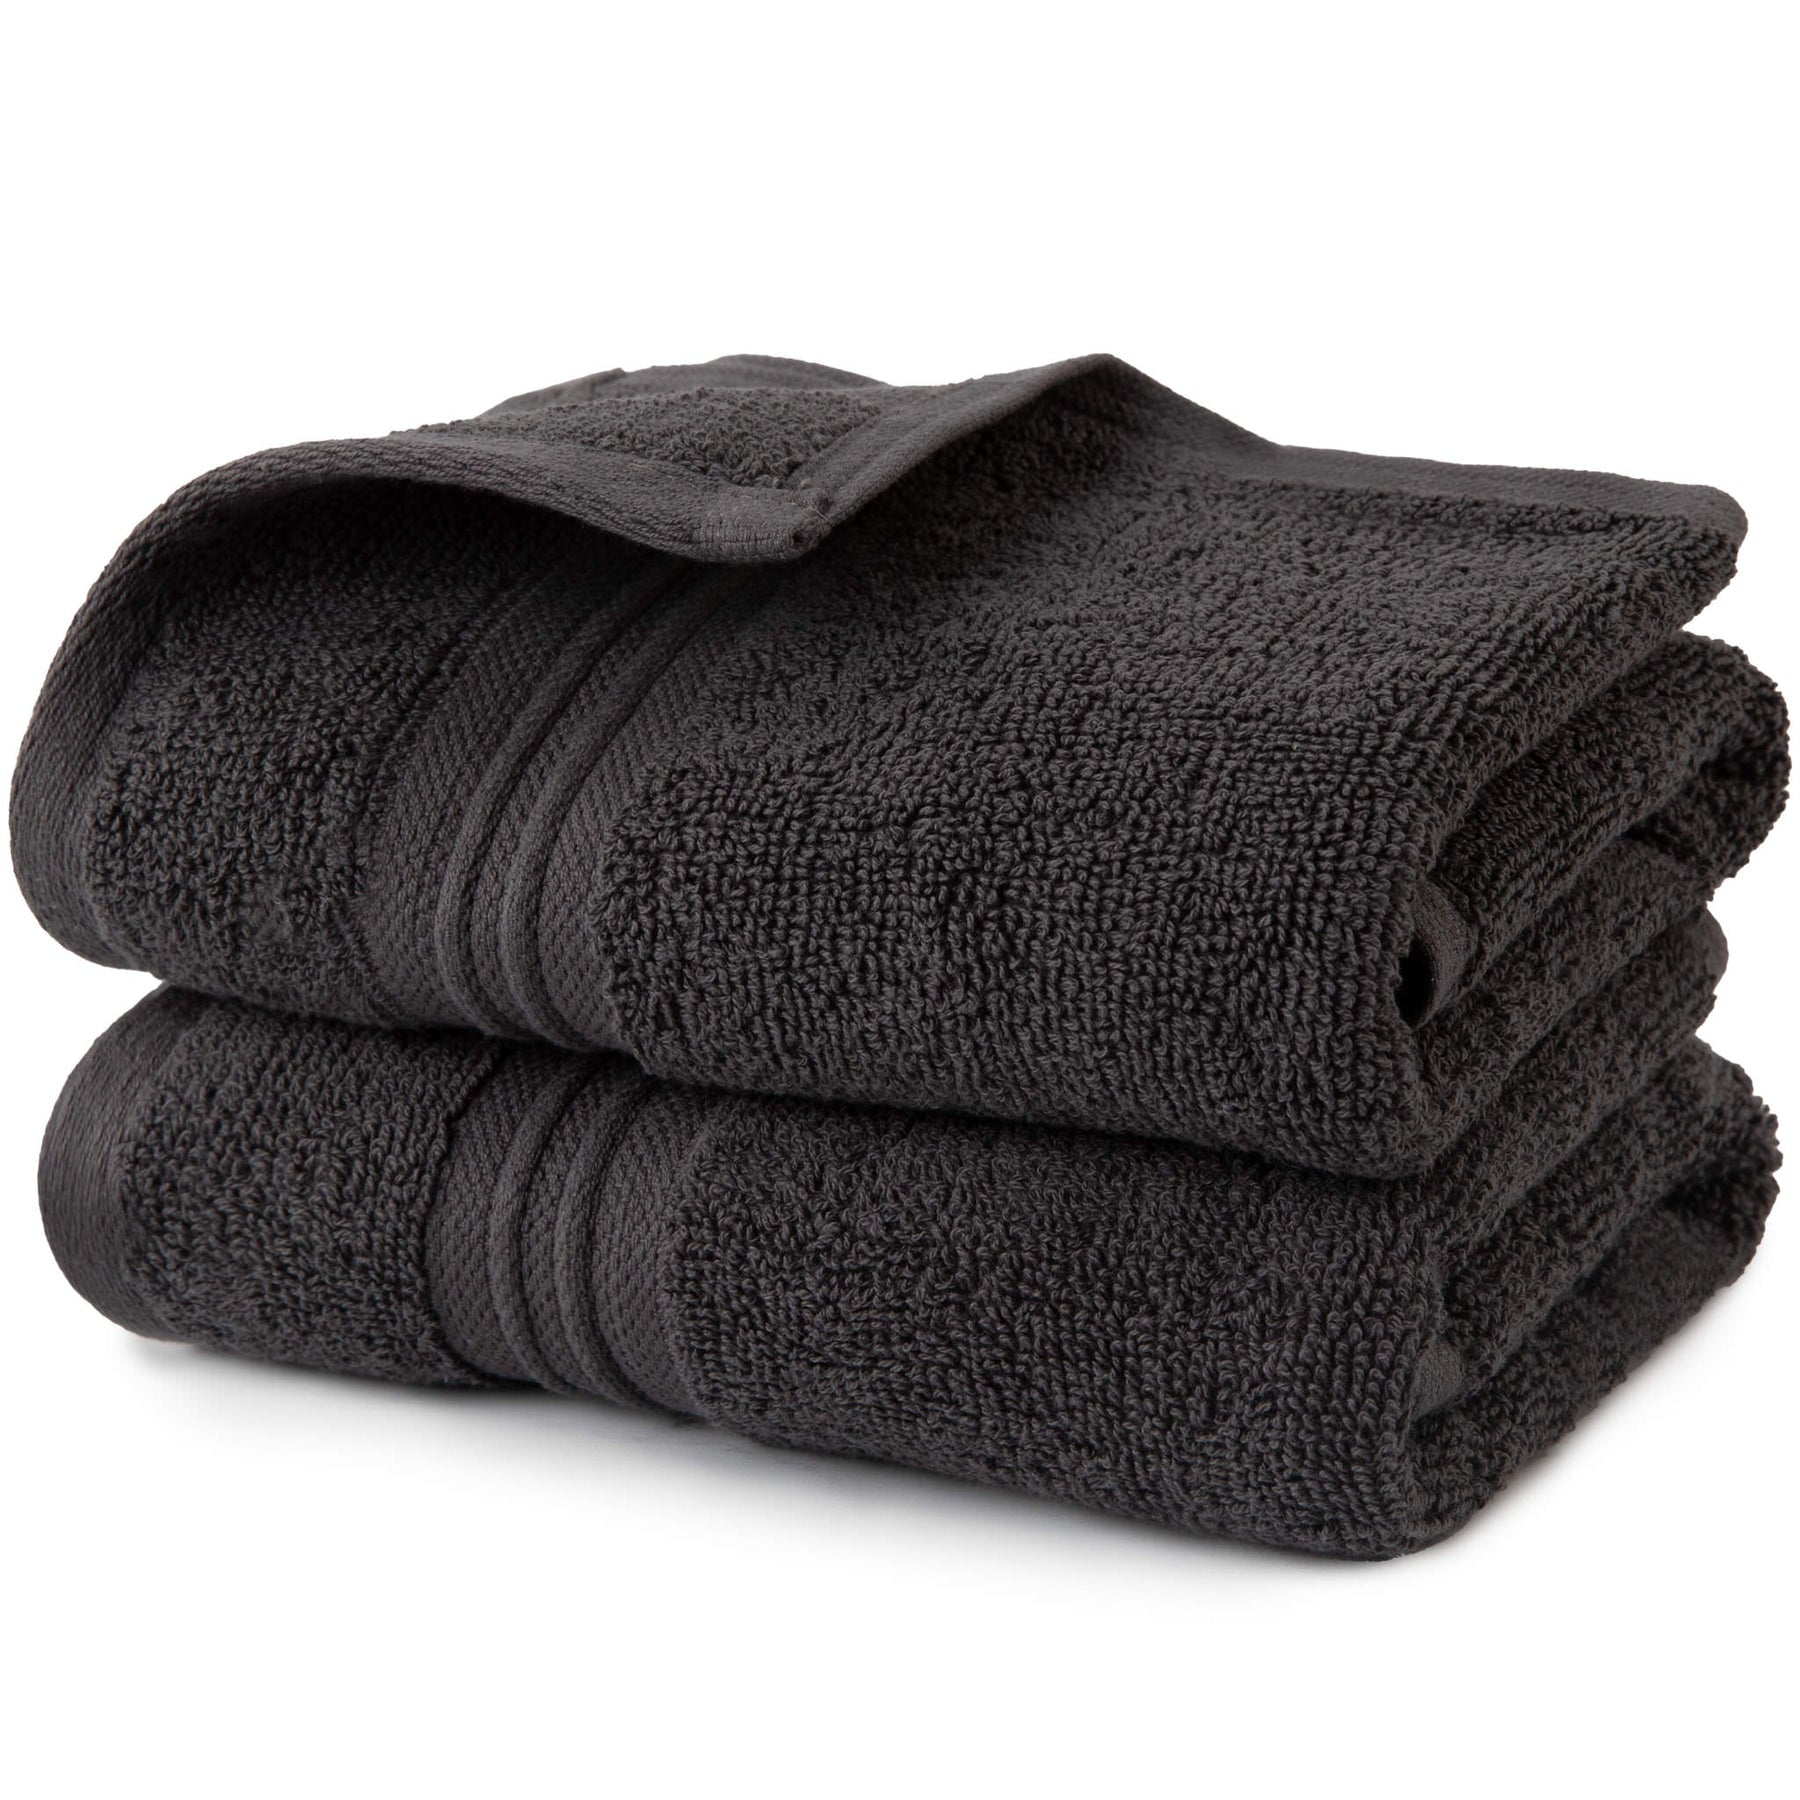 Sticky Toffee Terry Cotton Bath Towel Set for Bathroom, 4 Pack, Soft and Absorbent, 480 gsm, 30 in x 54 in, Gray, Size: 4 Piece Bath Towels